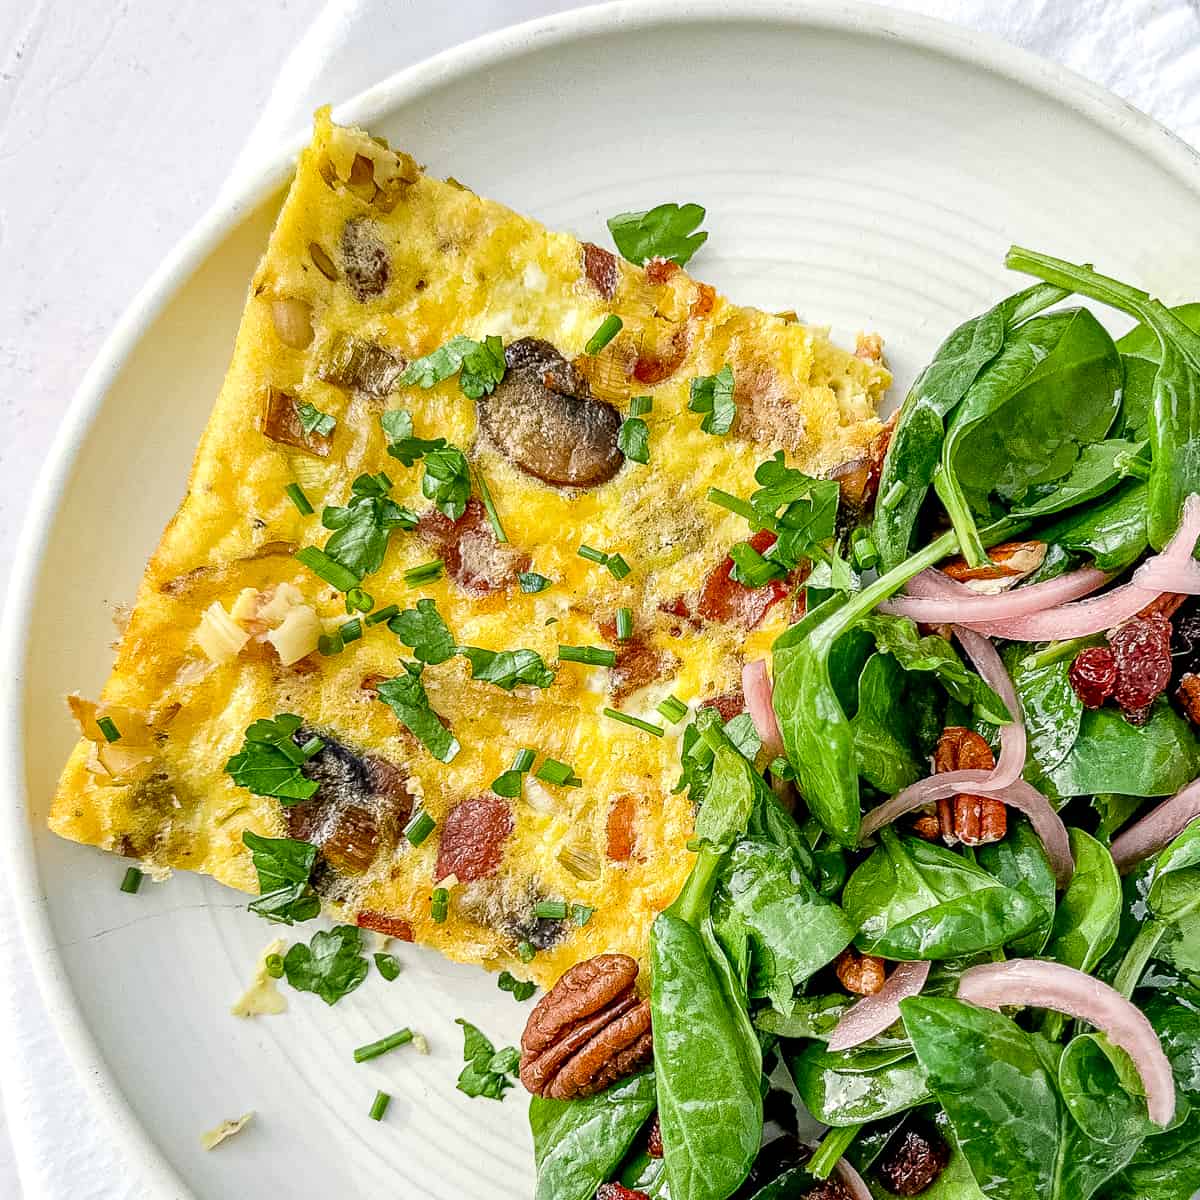 serving sheet pan frittata with a side salad for dinner.